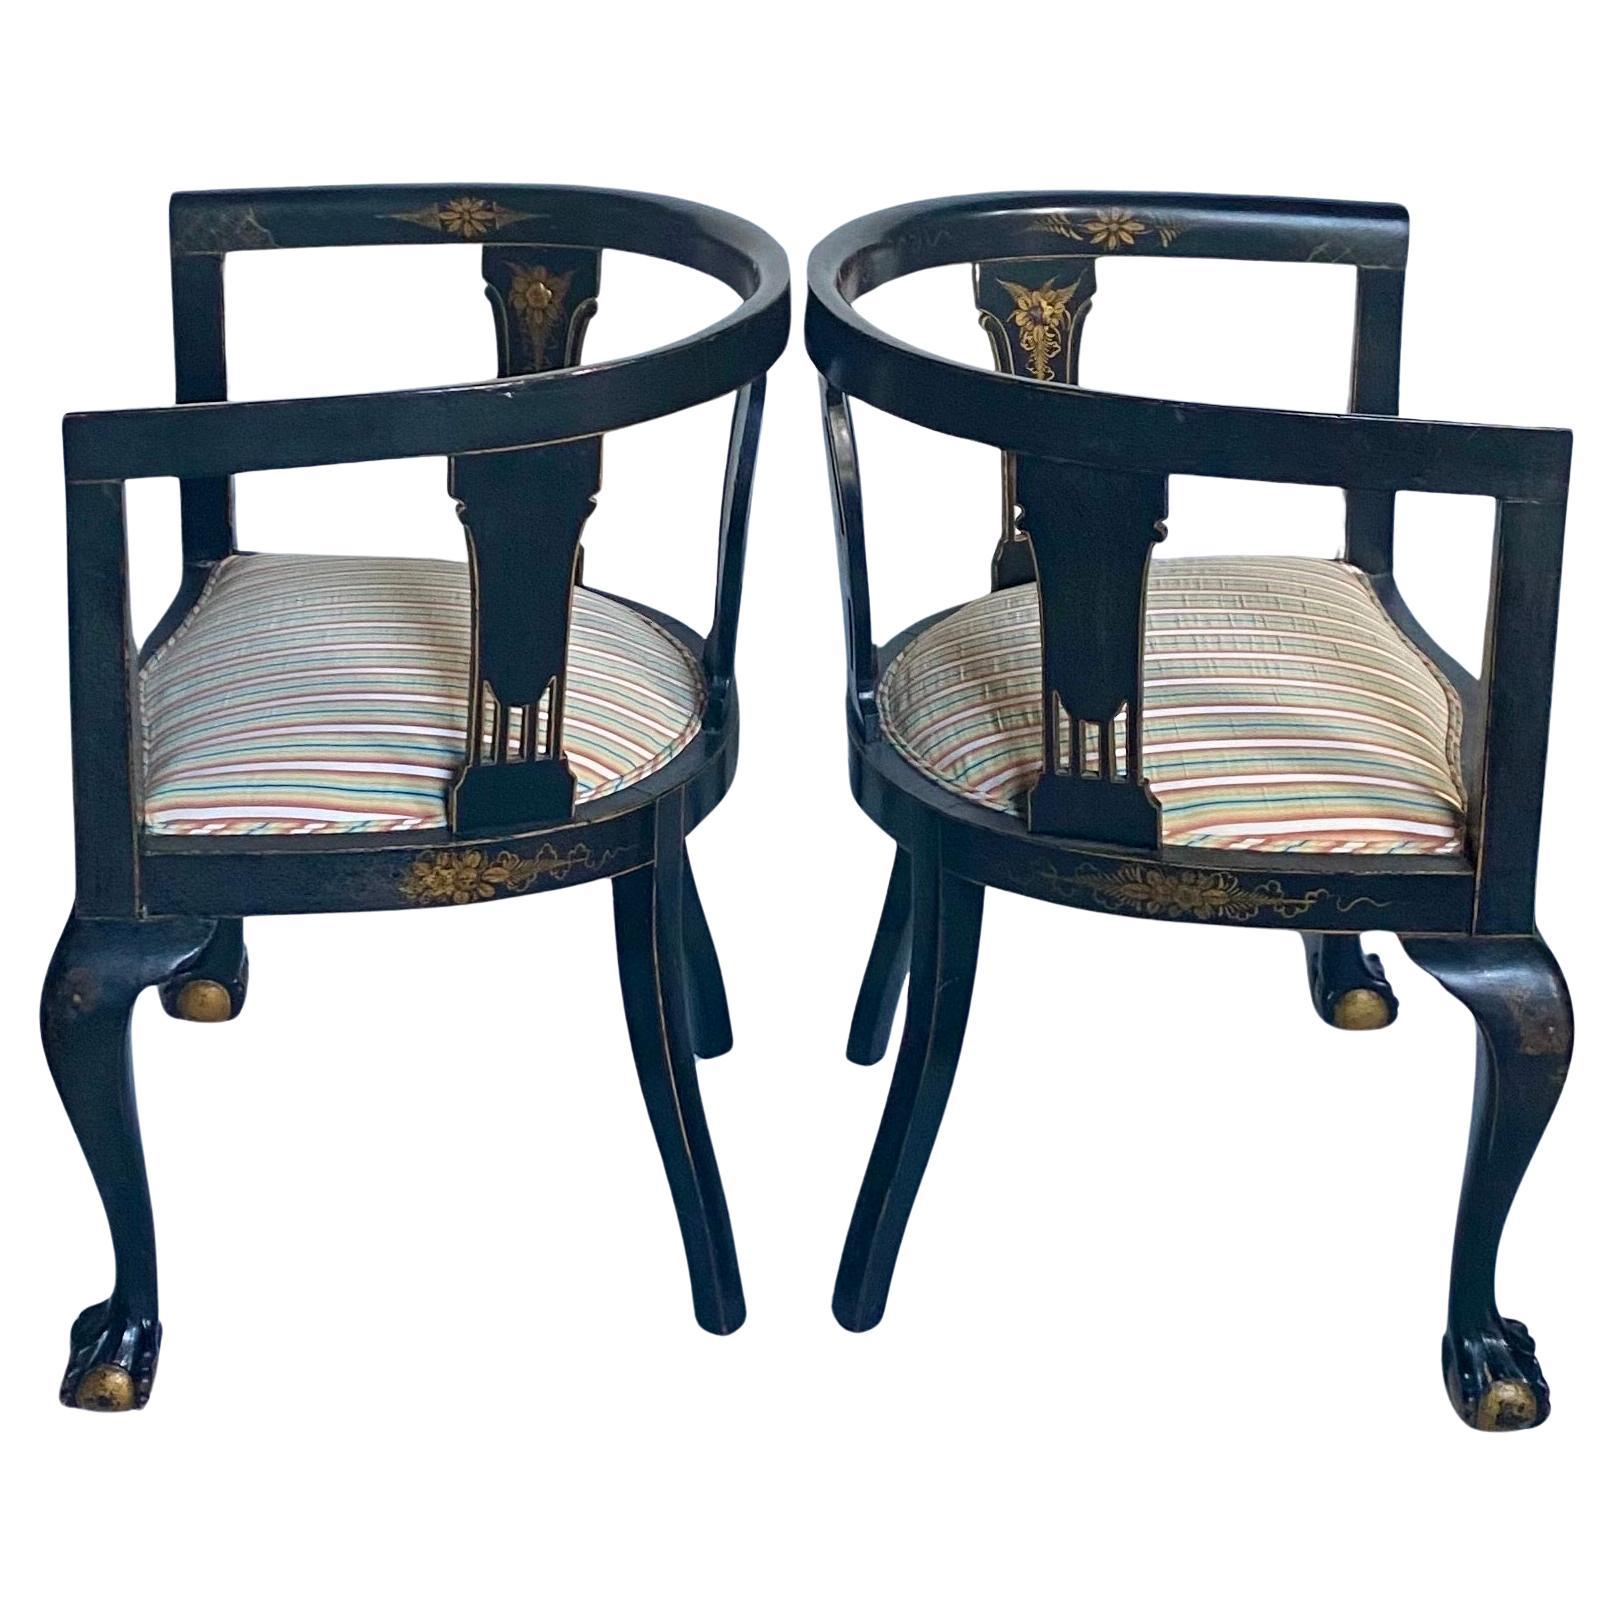 20th Century Chinoiserie Ebonized Gilt Accent Clawfoot Tub Armchairs, Pair  For Sale